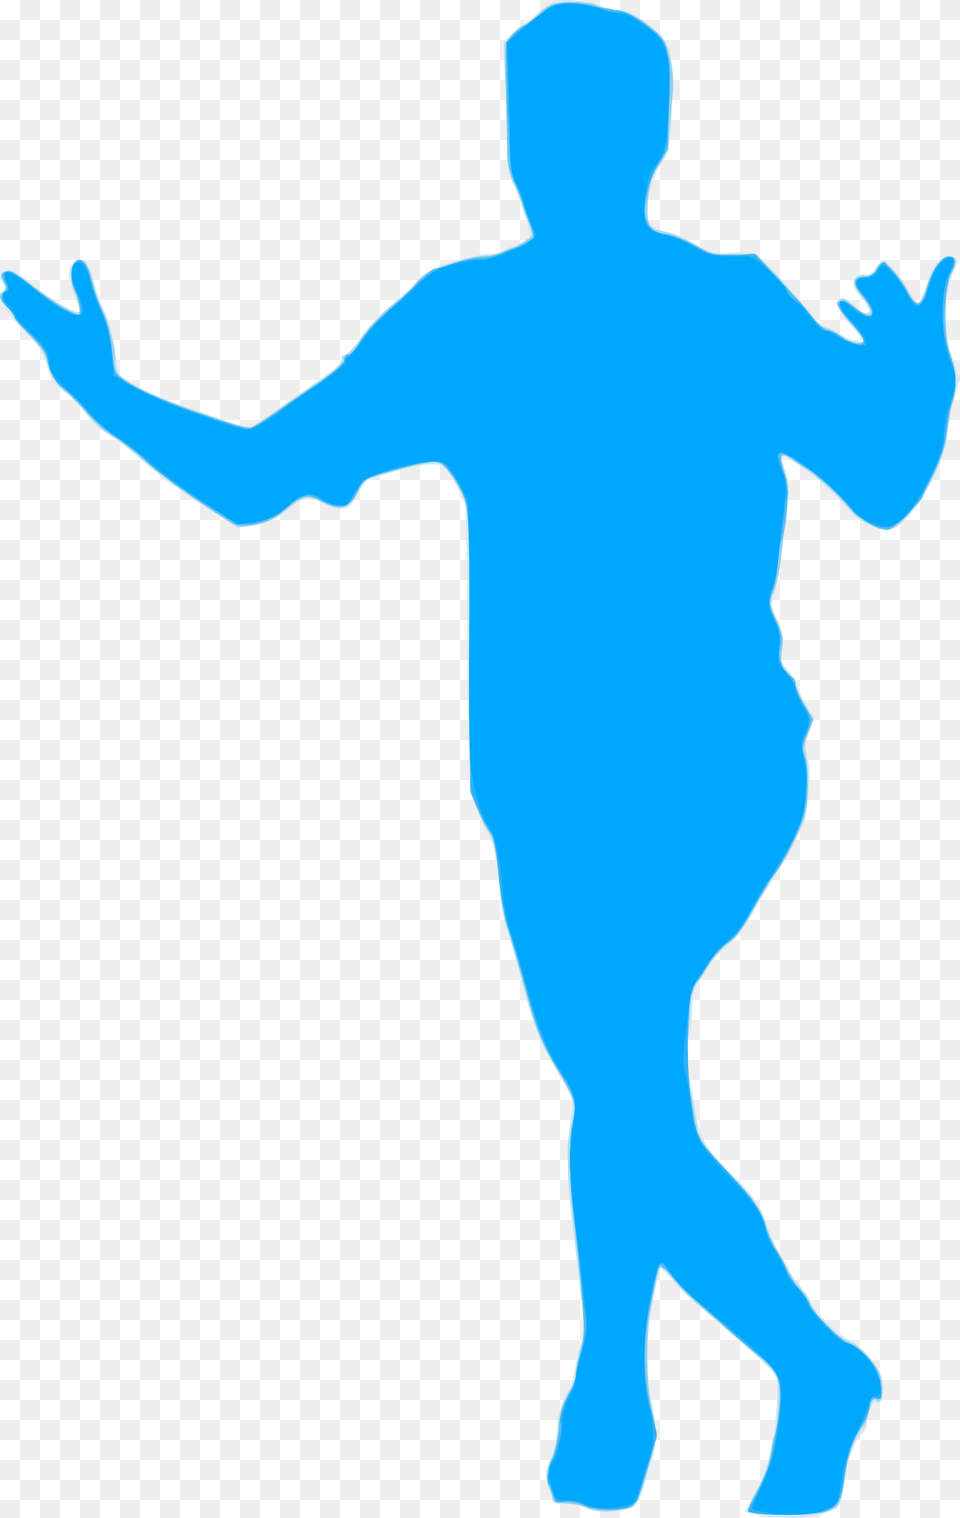 Soccer Player Celebrating A Goal Public Domain Vectors Football Player Celebrating, Silhouette, Baby, Person, Dancing Png Image